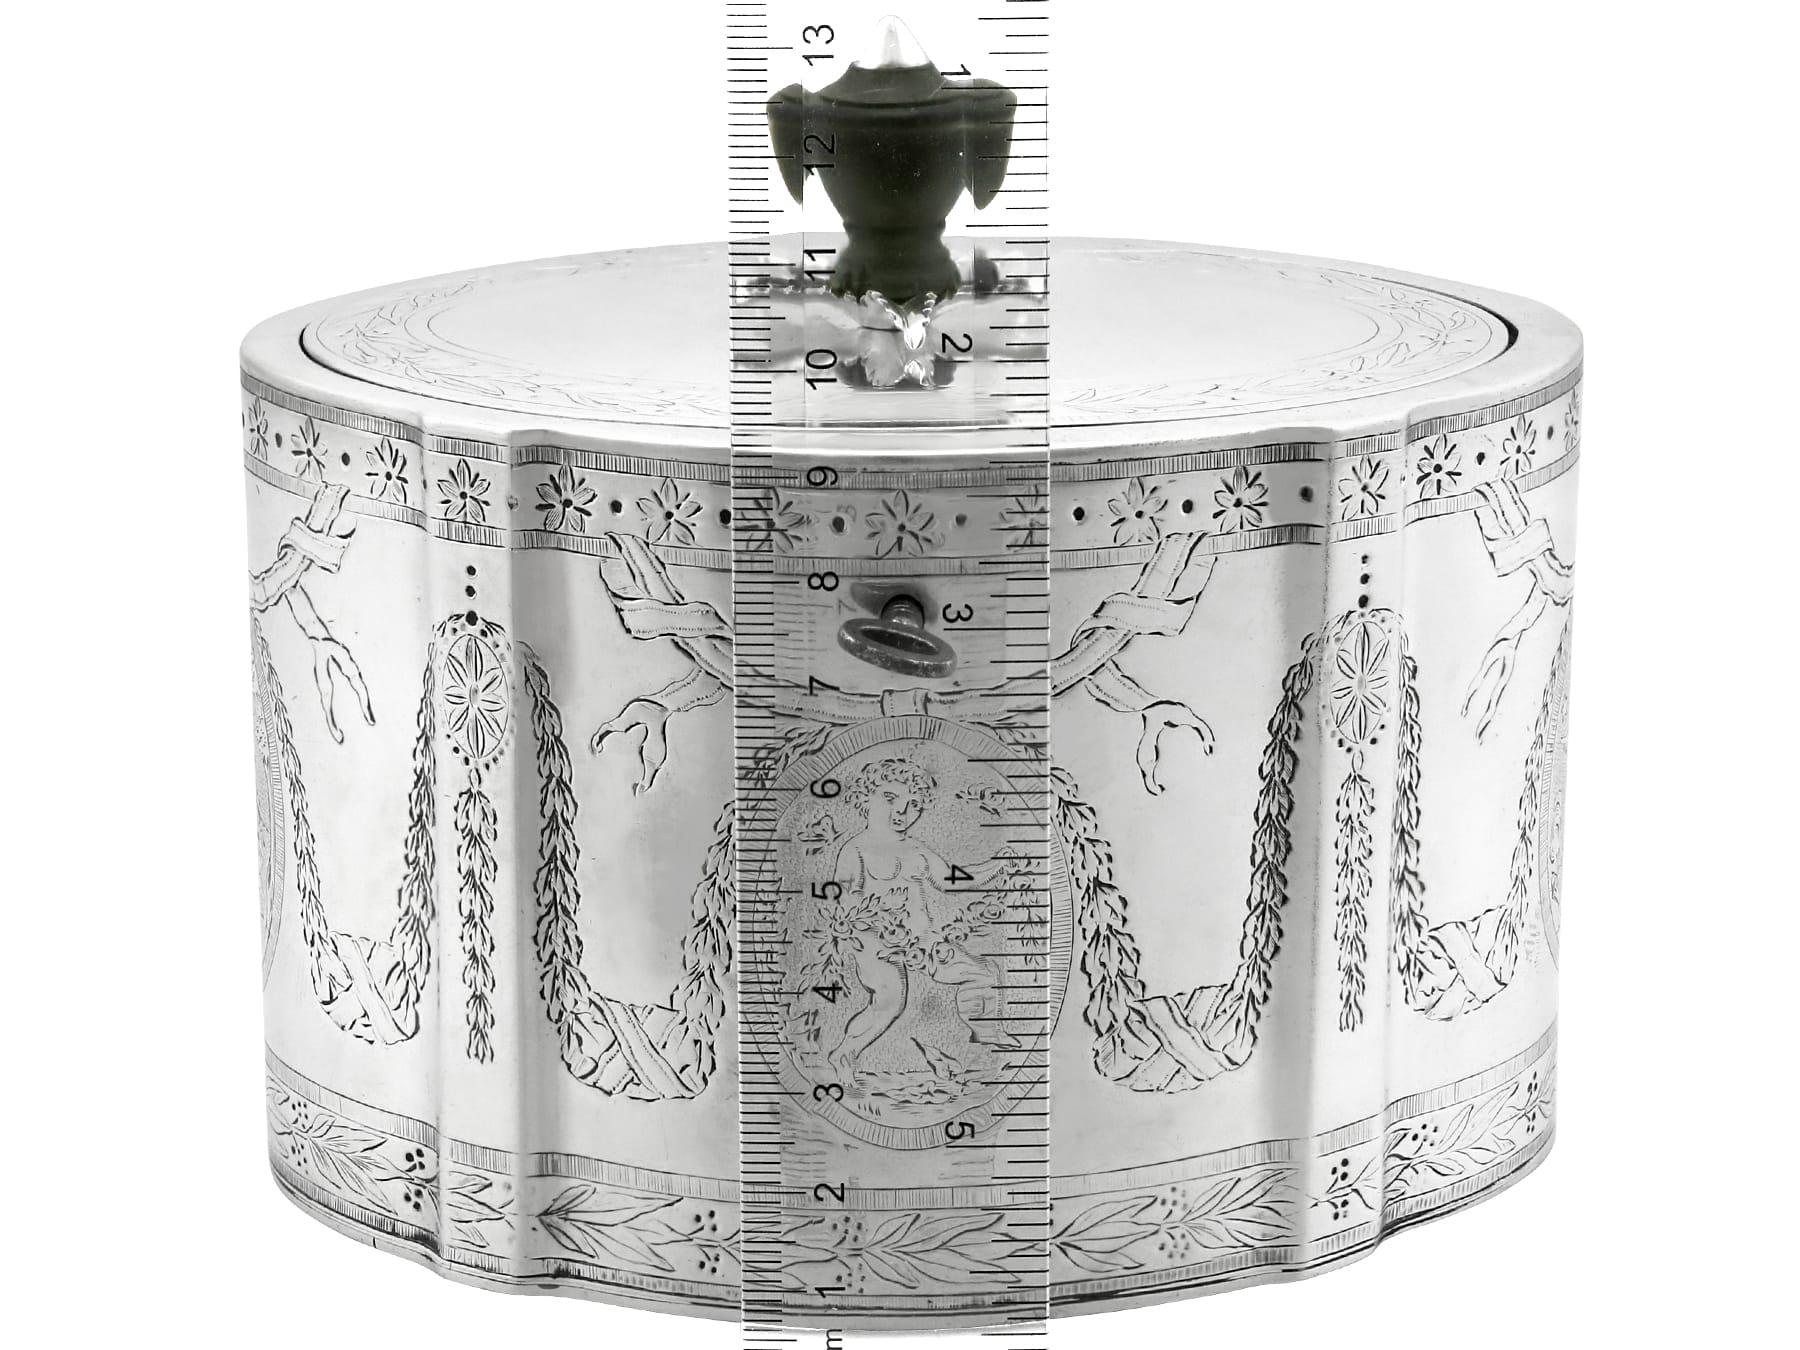 Antique George III Sterling Silver Locking Tea Caddy (1783) For Sale 11